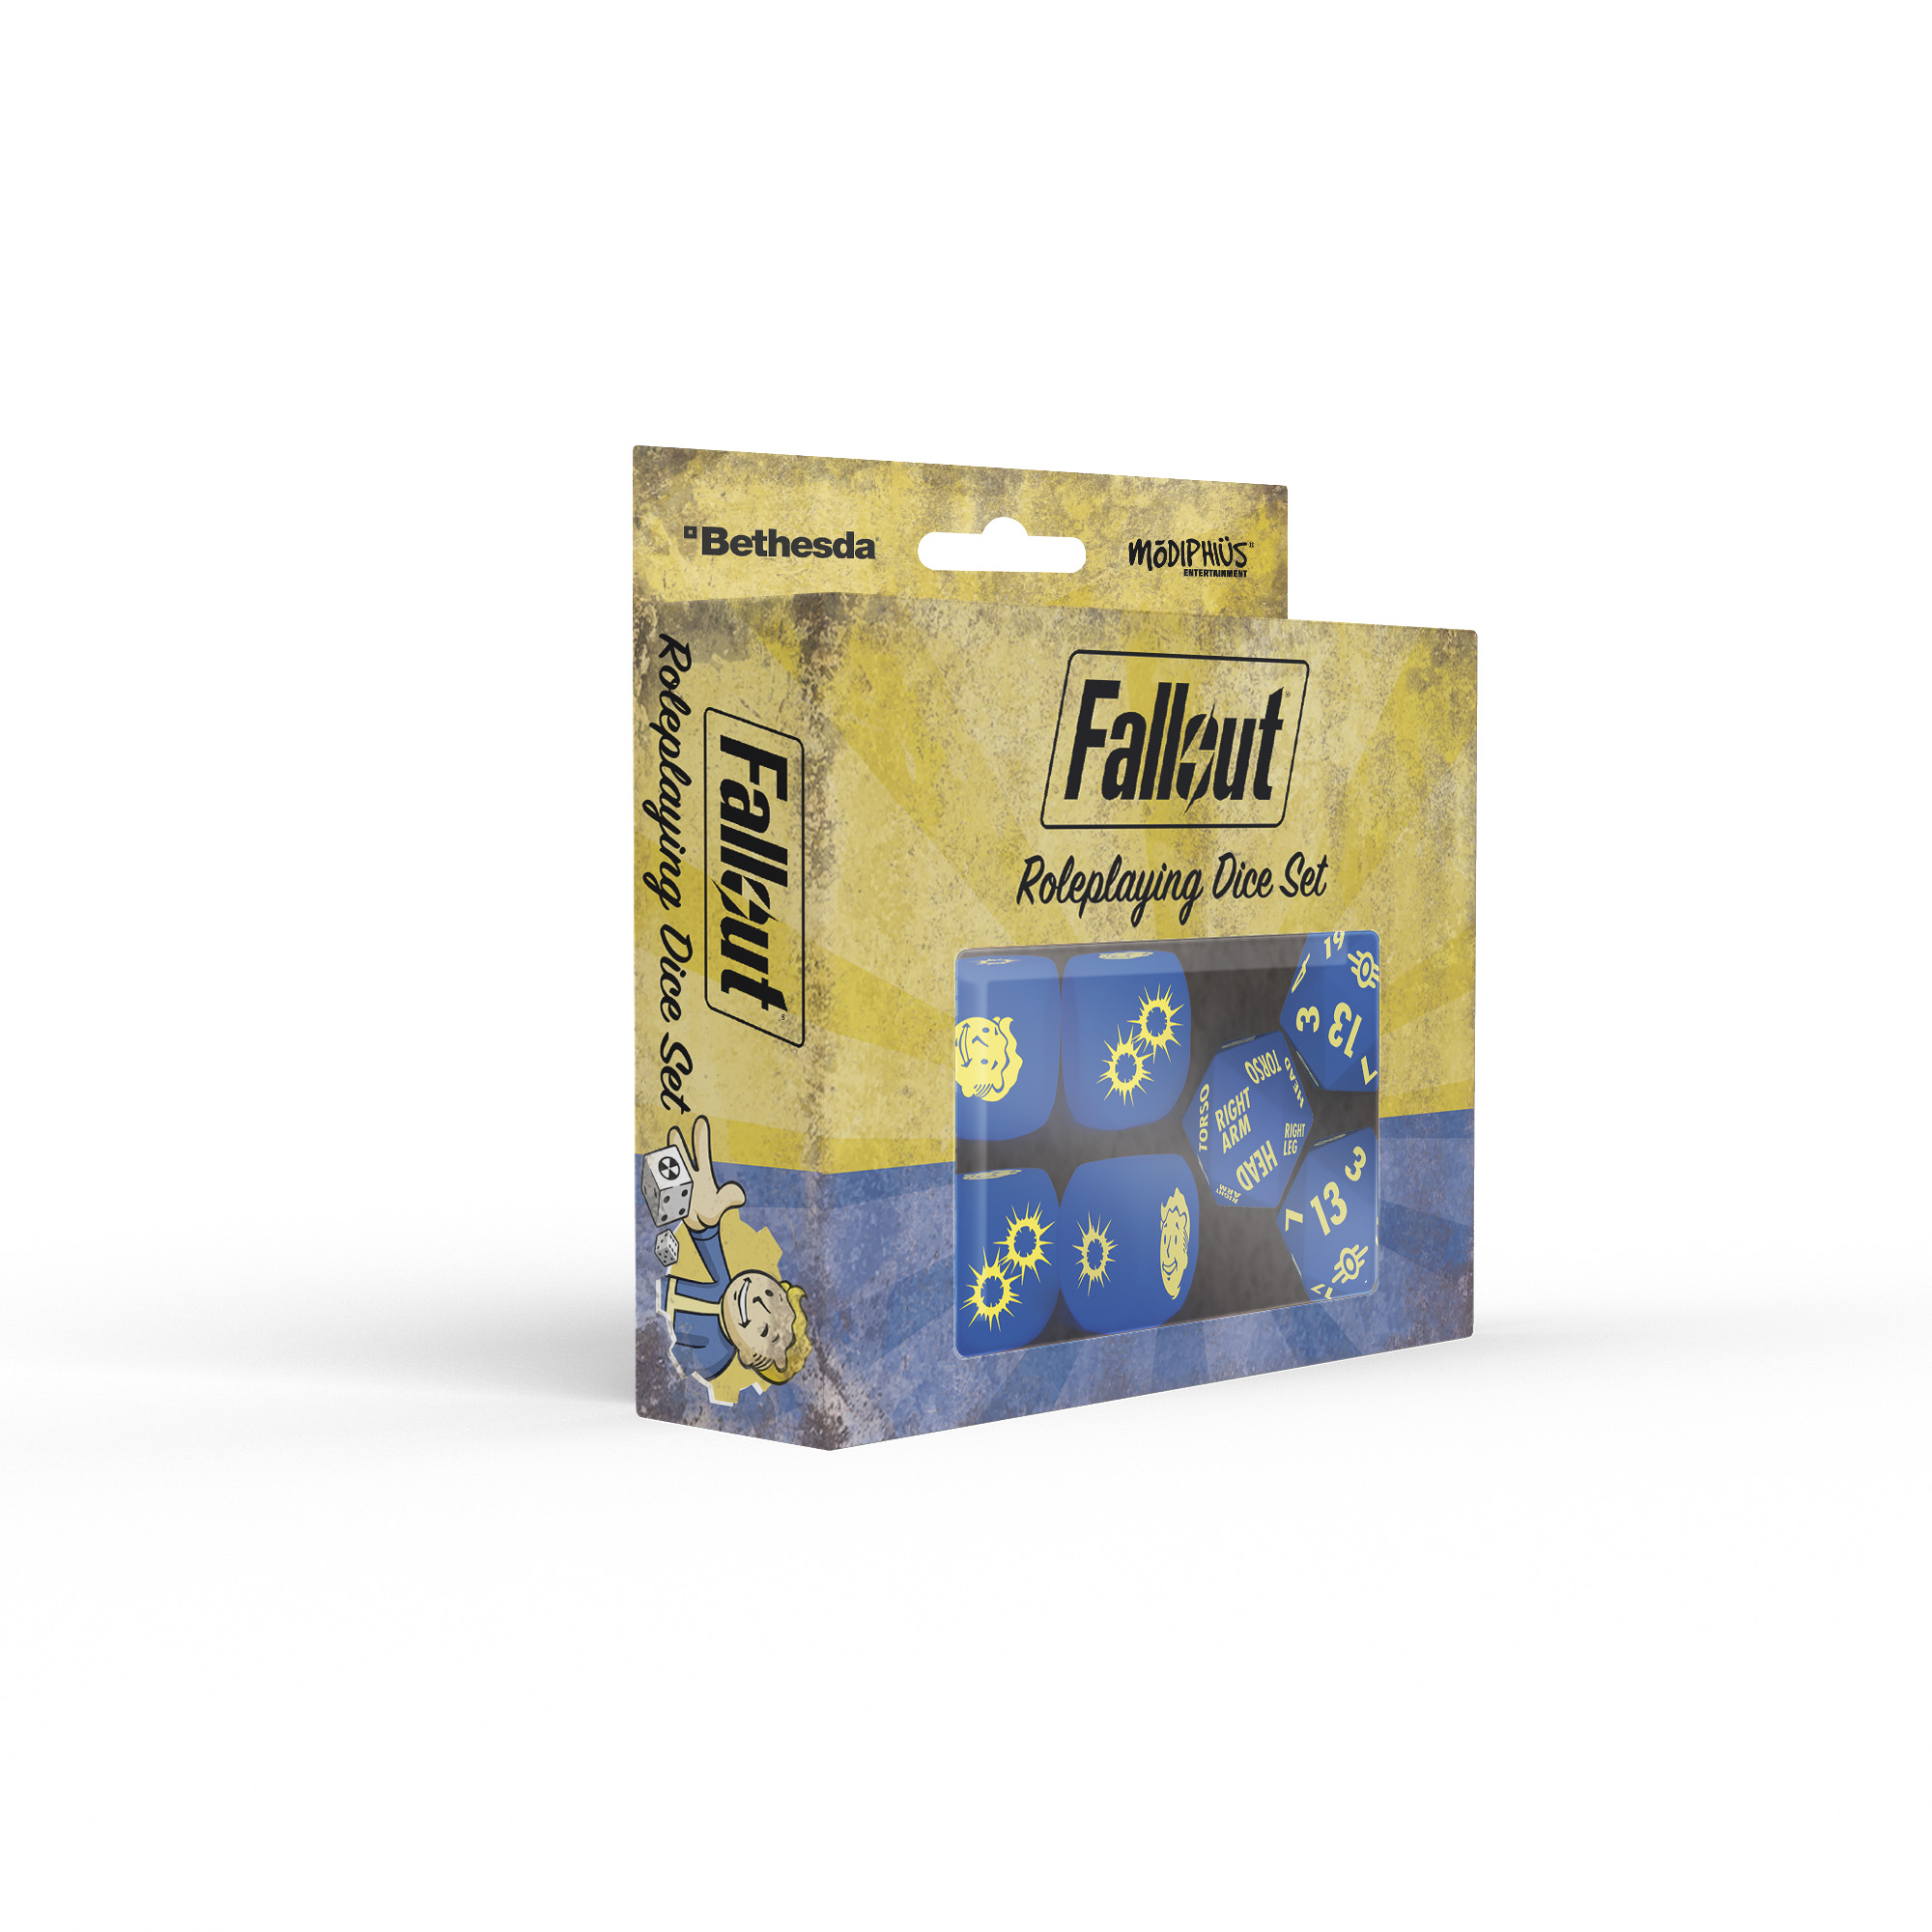 An image of the book and box for Fallout: The Roleplaying Game, a tabletop RPG based on the Fallout series.